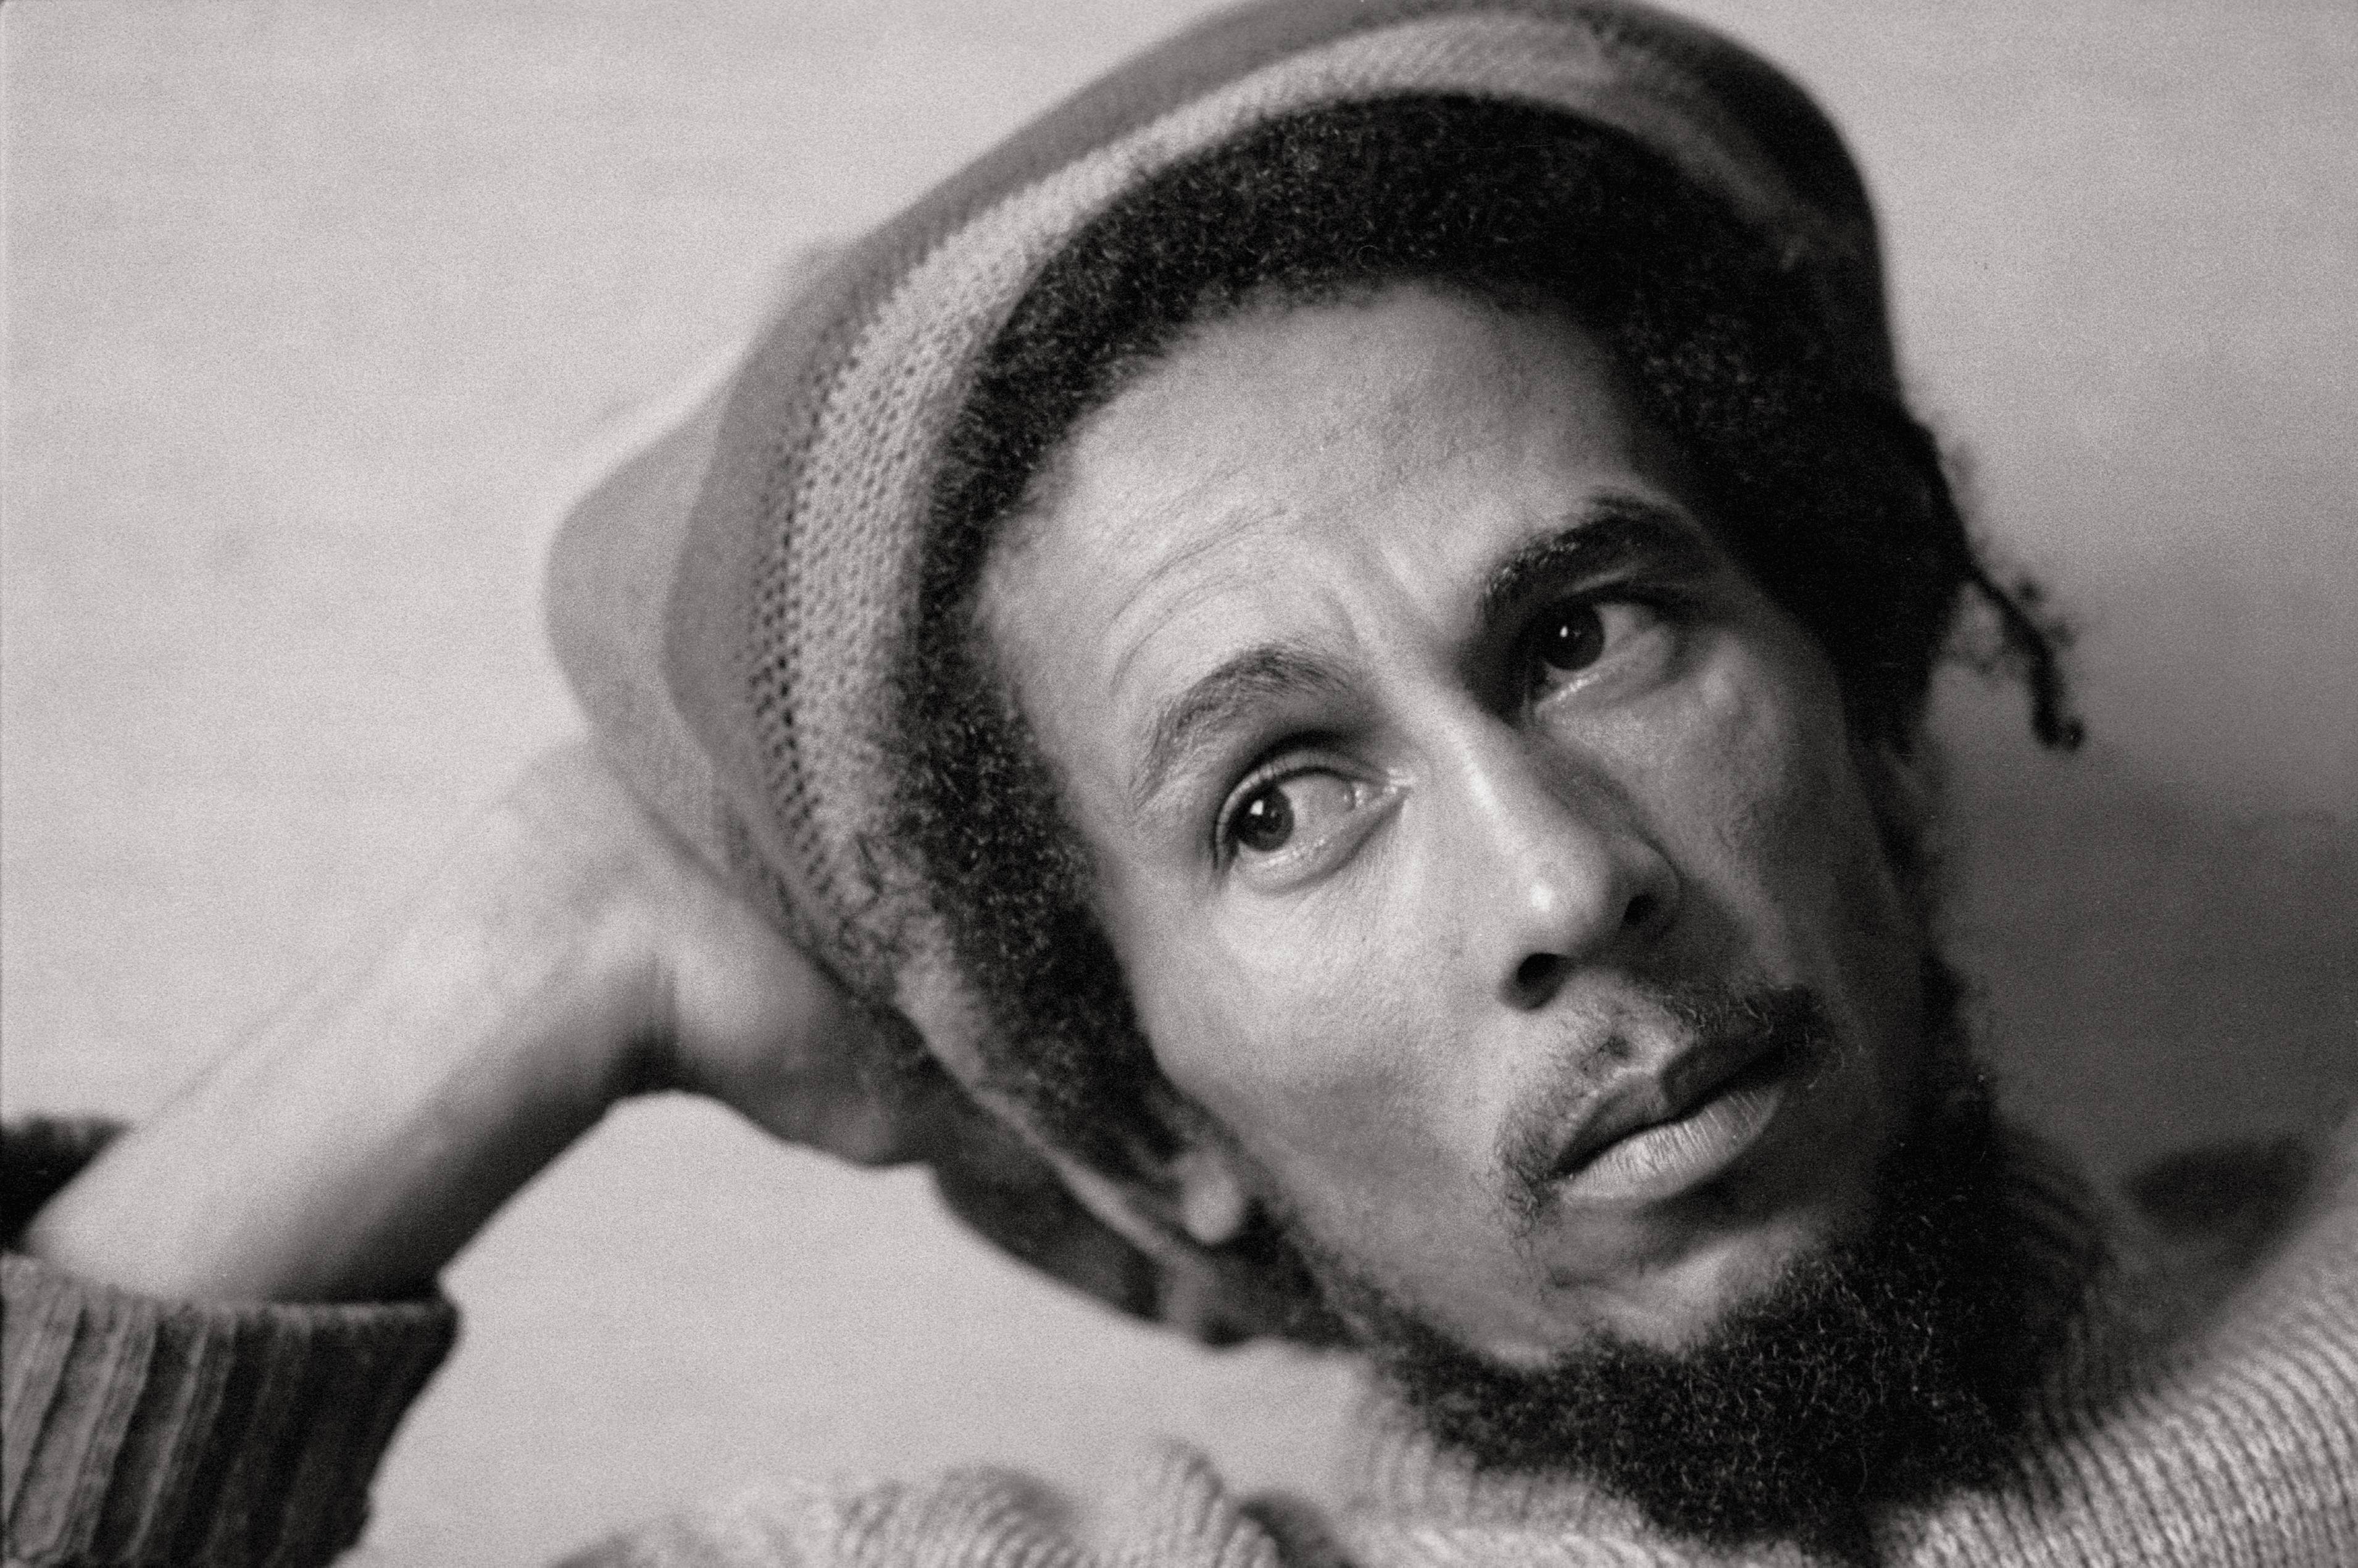 Bob Marley sits wearing a cap on his head for photo created on January 1, 1980 | Photo: Getty Images